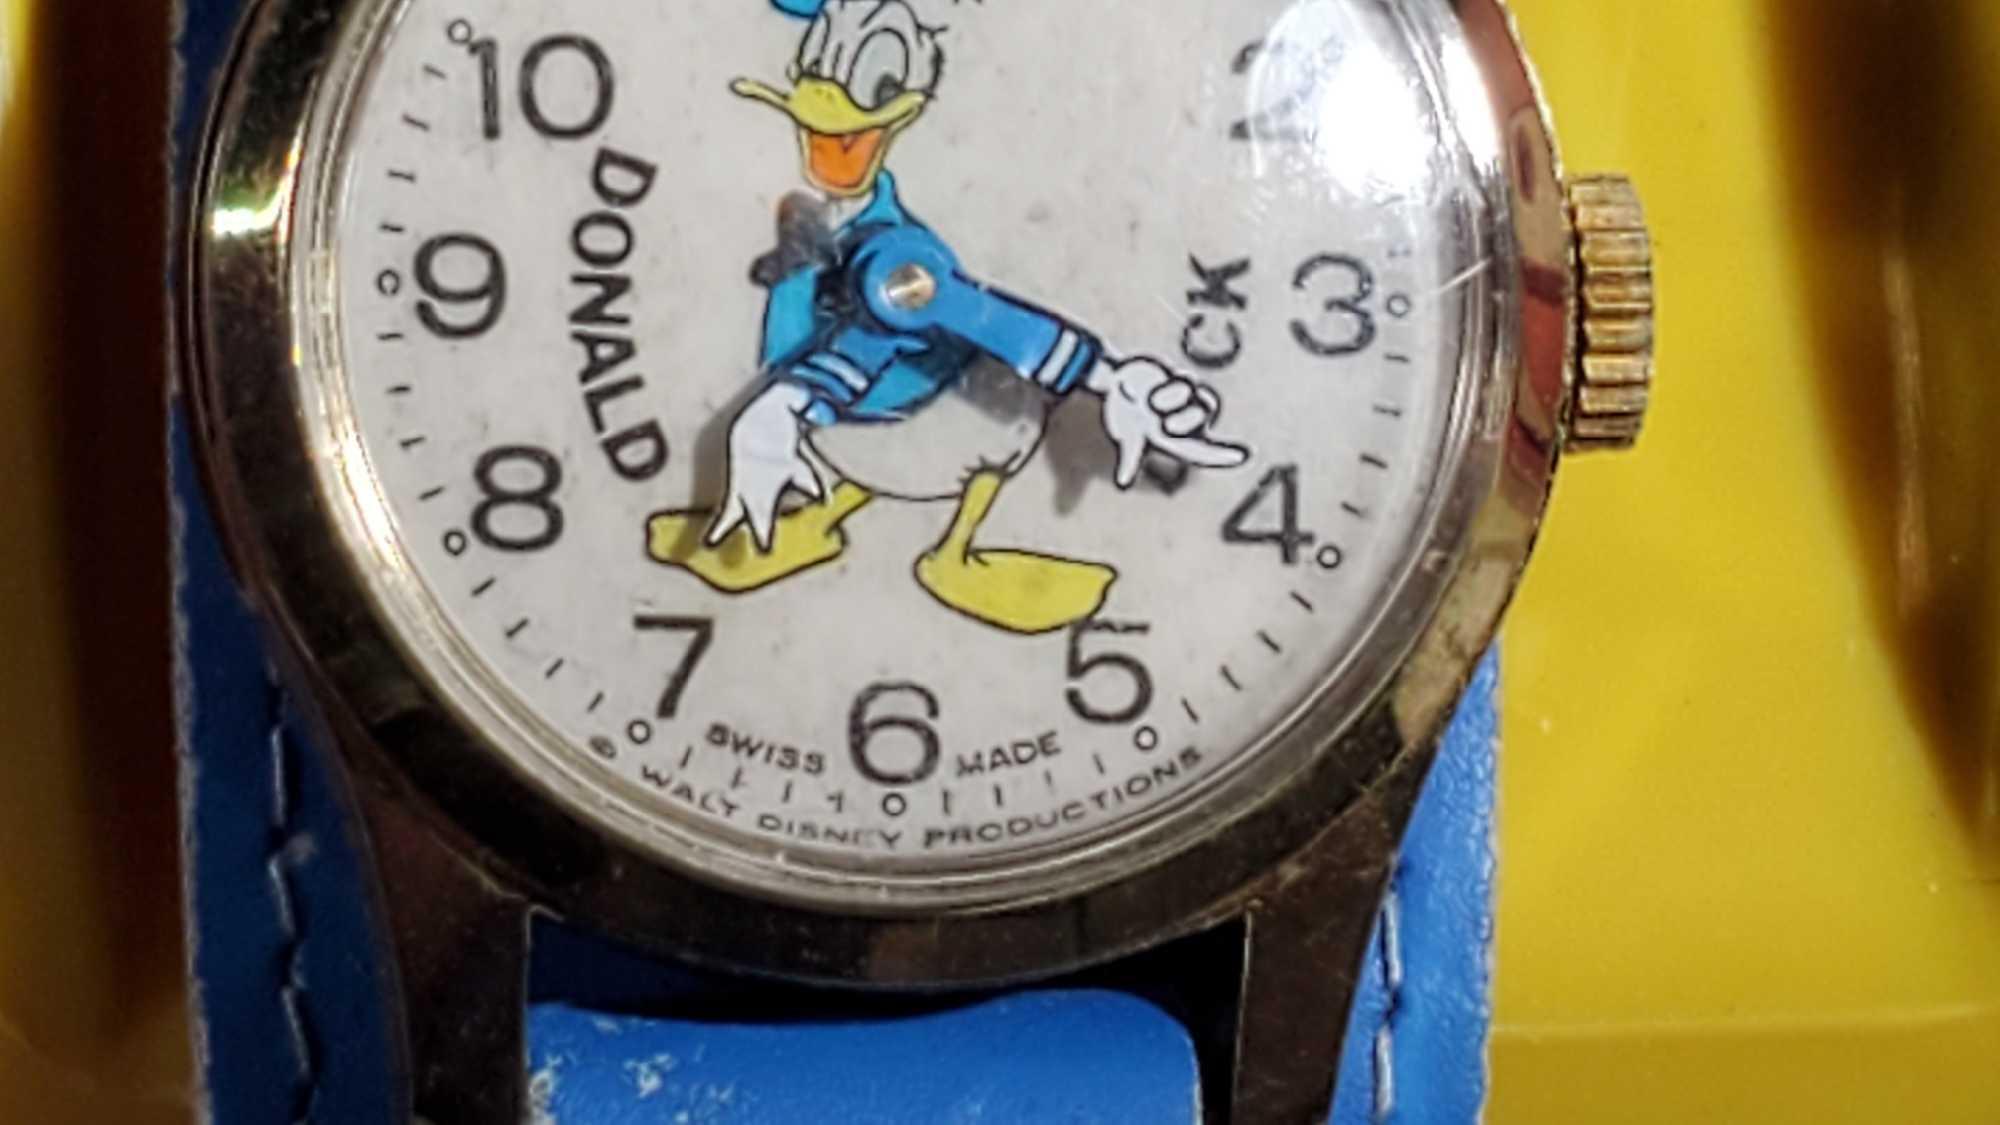 Walt Disney Mickey Mouse Watches (4), Marx Figures and More